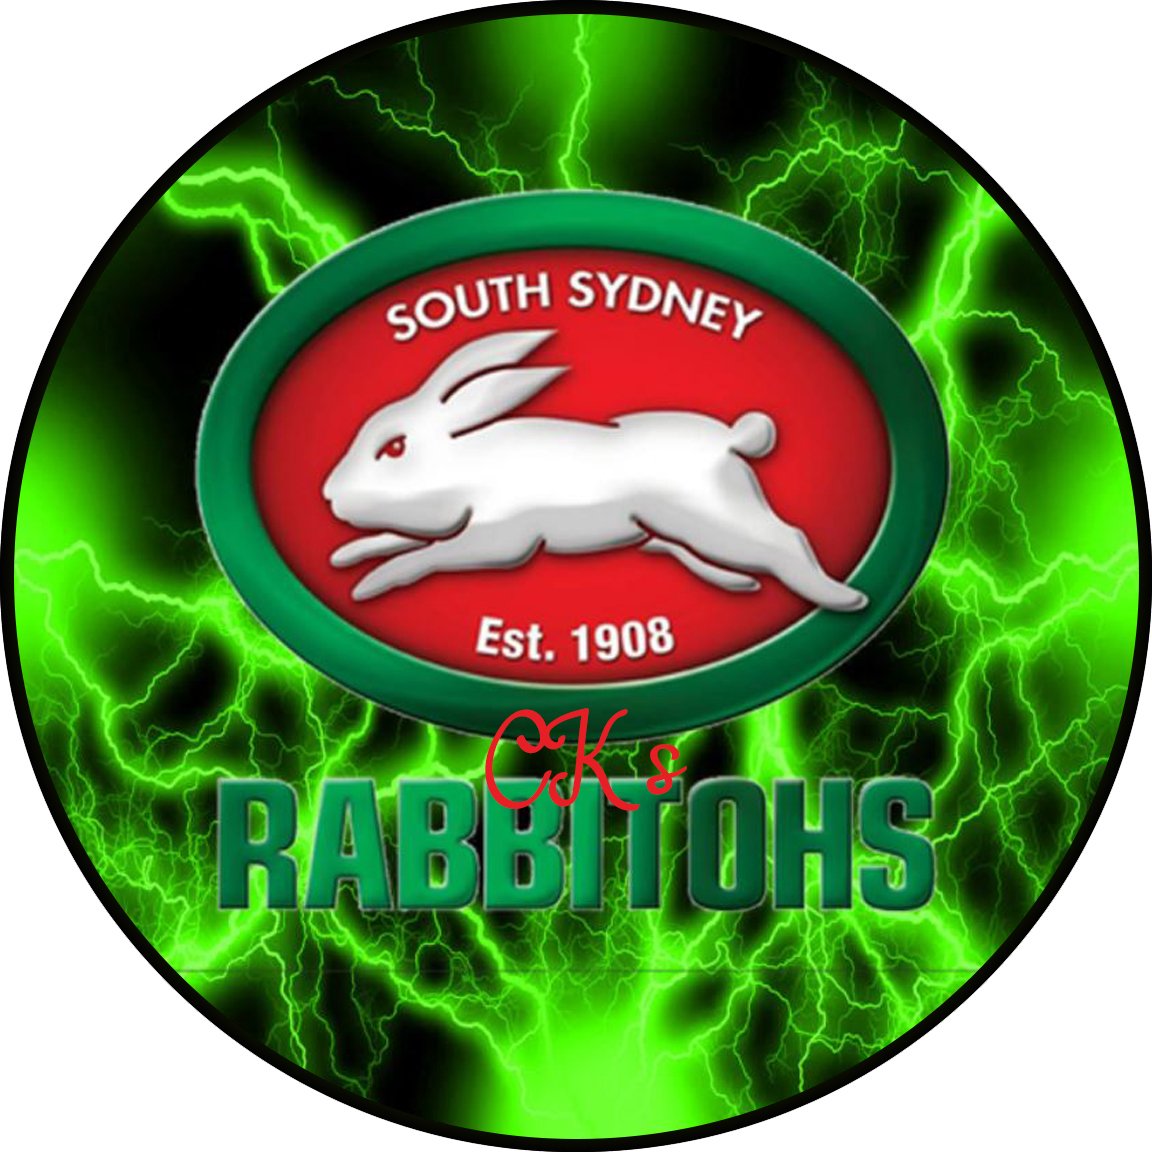 South Sydney Rabbitohs Wafer Paper Sheet Edible Image Cake Topper